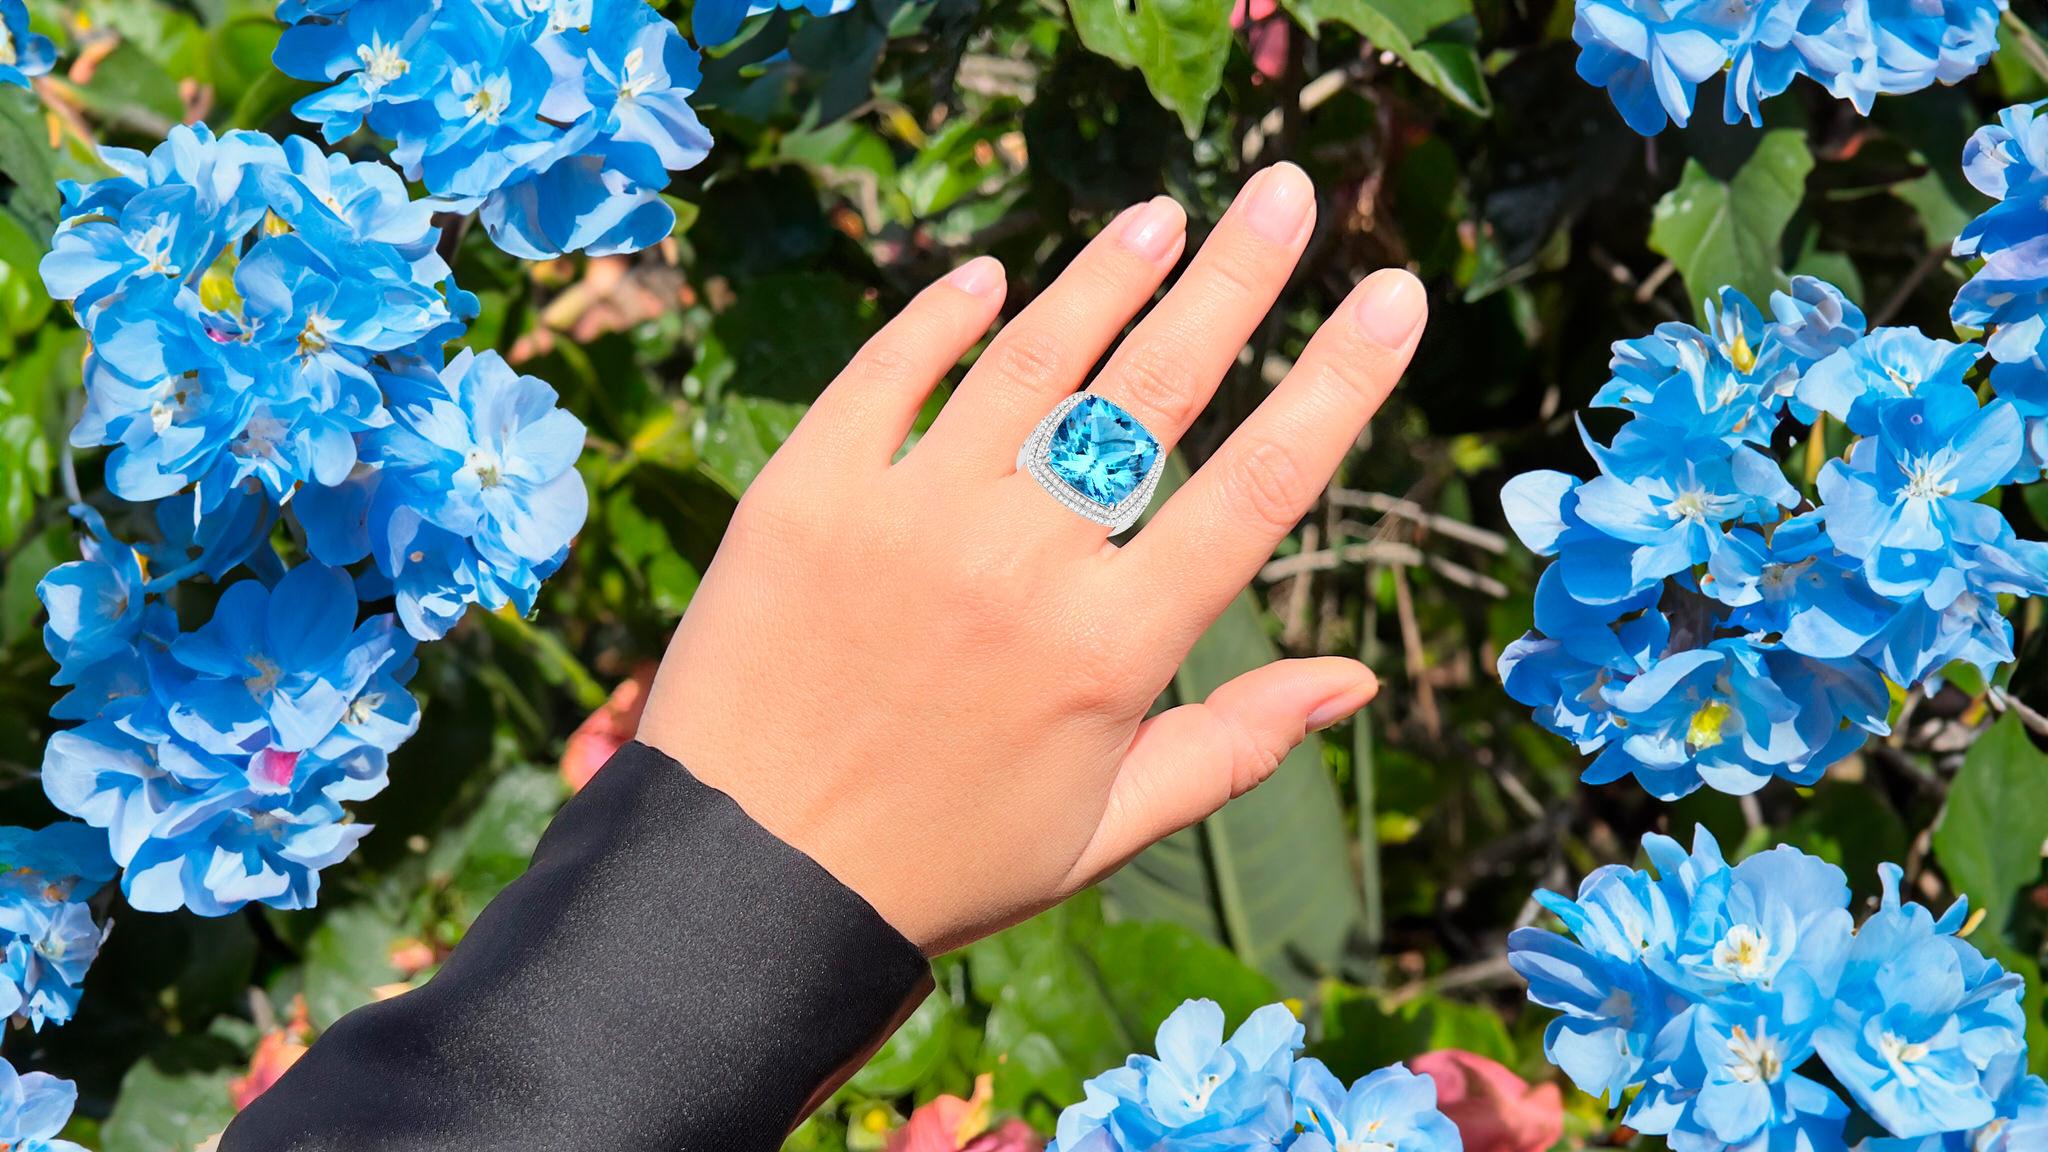 It comes with the Gemological Appraisal by GIA GG/AJP
All Gemstones are Natural
Aquamarine = 12.80 Carats
154 Diamonds = 0.77 Carats
Metal: 14K White Gold
Ring Size: 7* US
*It can be resized complimentary